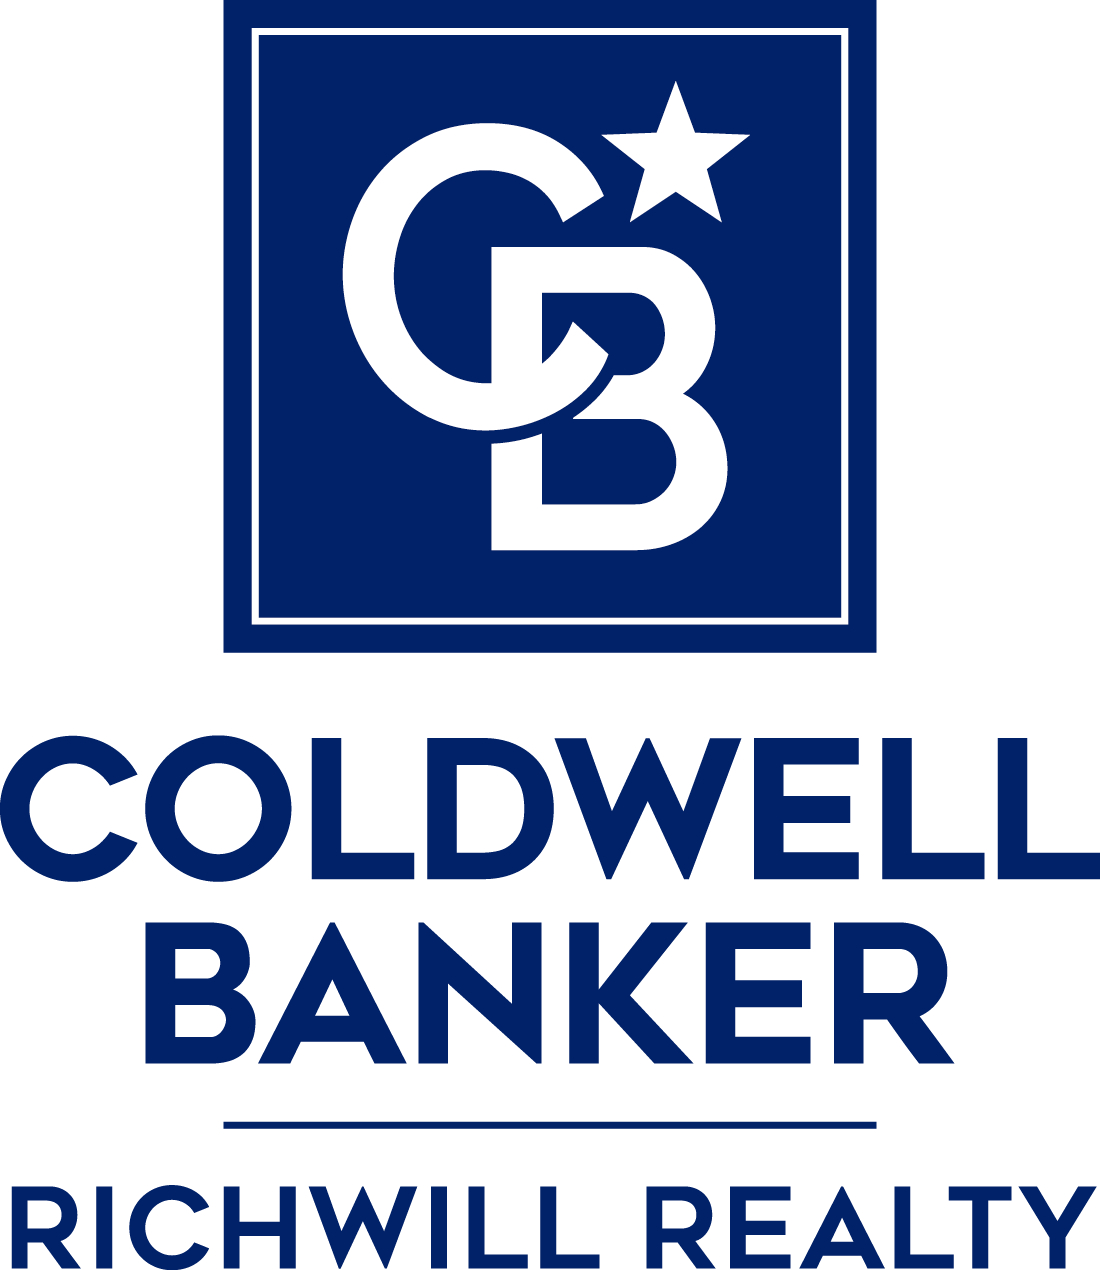 Coldwell-Banker-Richwill-Realty-logo.jpg